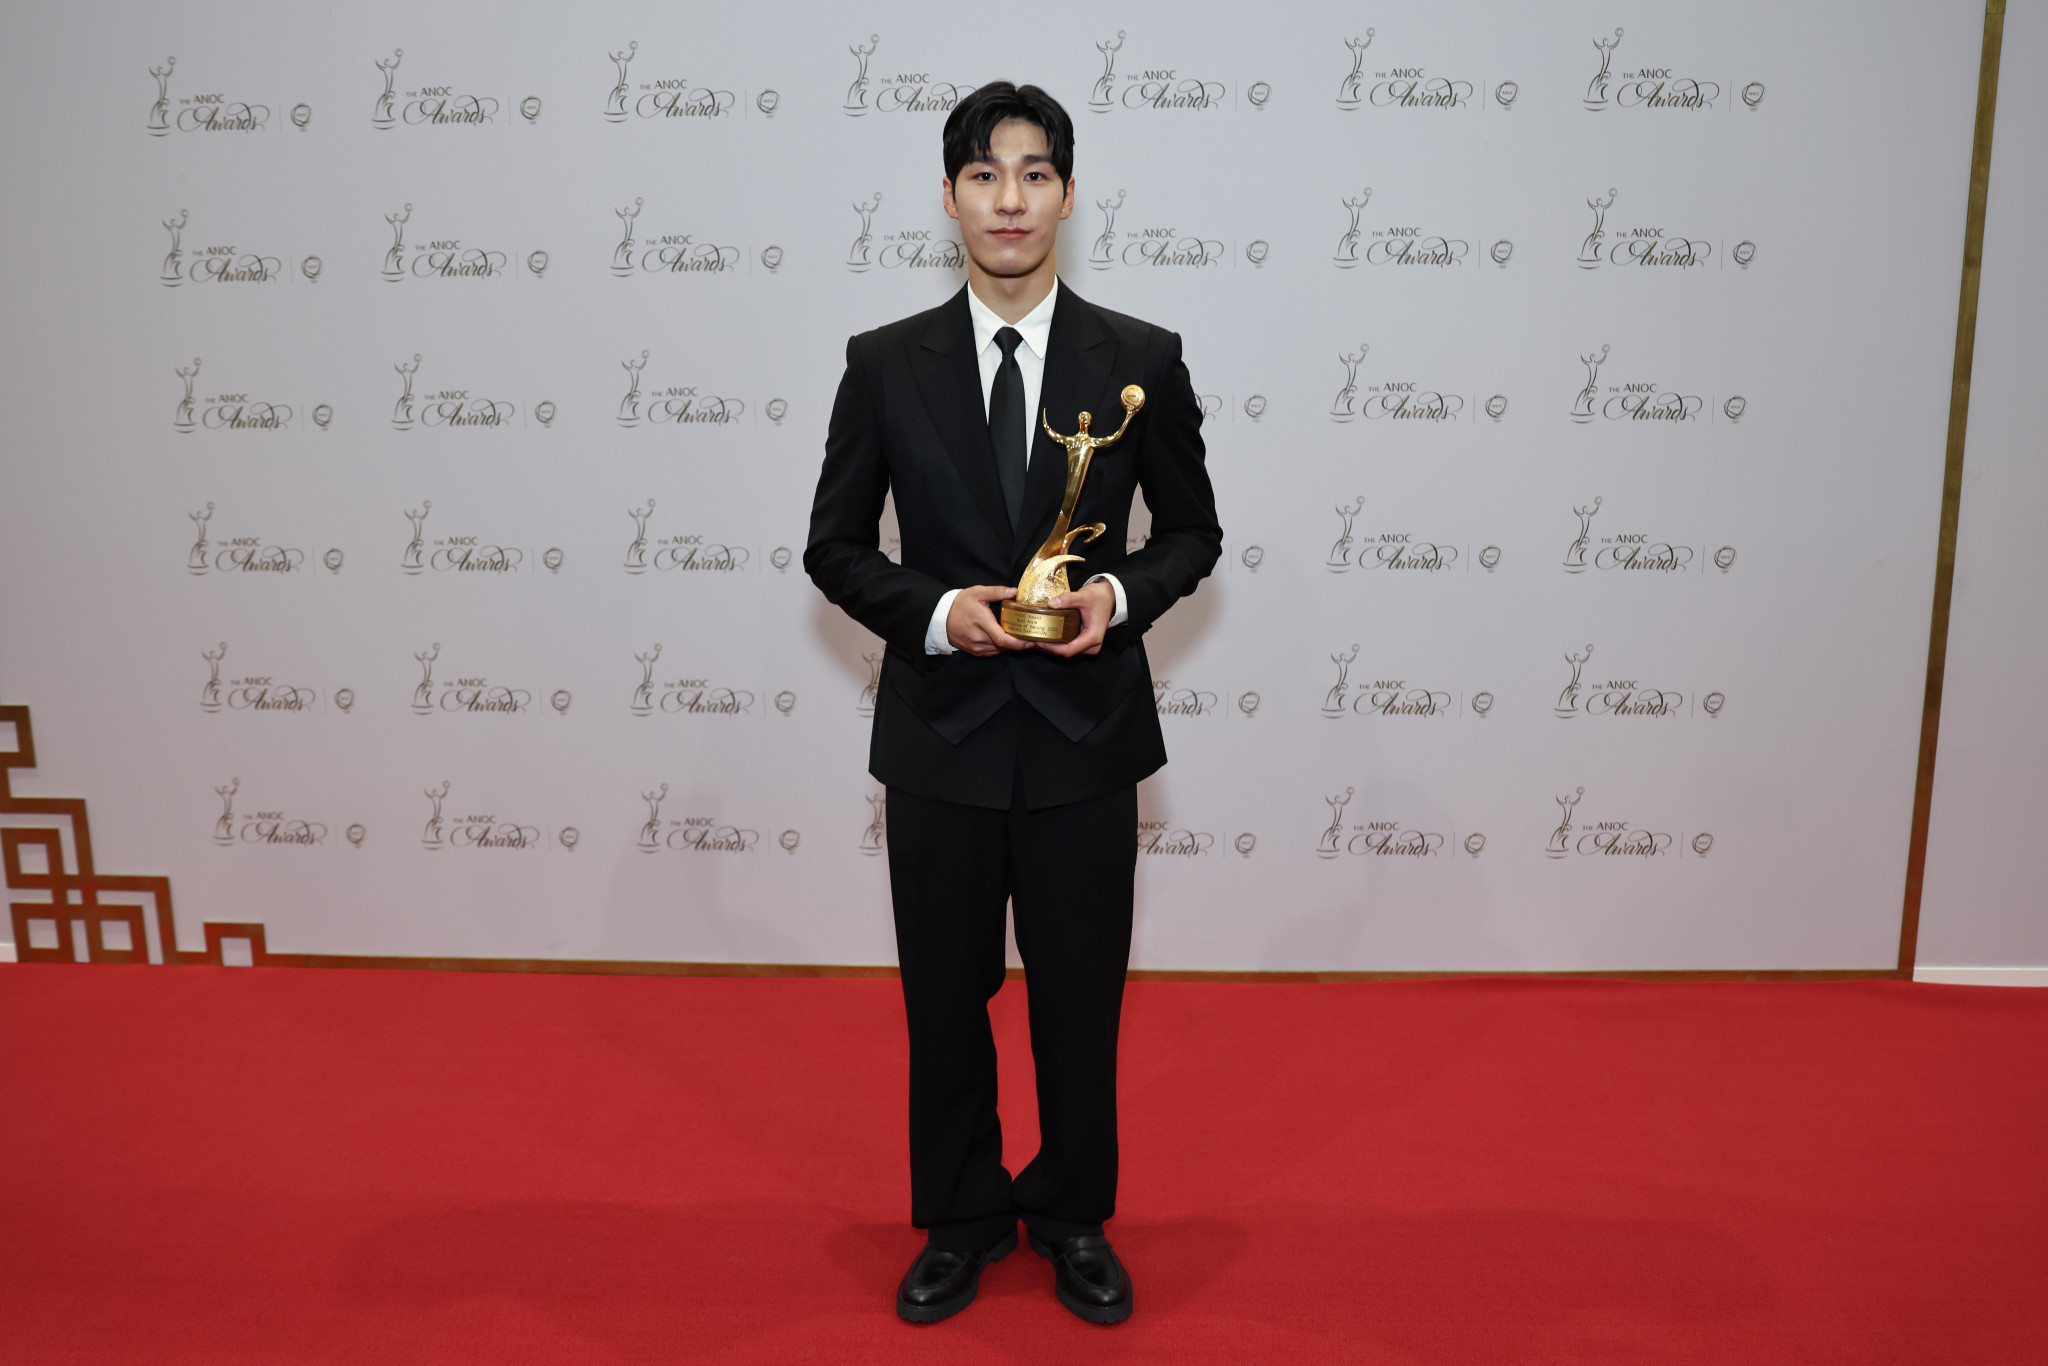 South Korea's Hwang Dae-heon staved off stiff competition to win the best male athlete at Beijing 2022 award ©ANOC